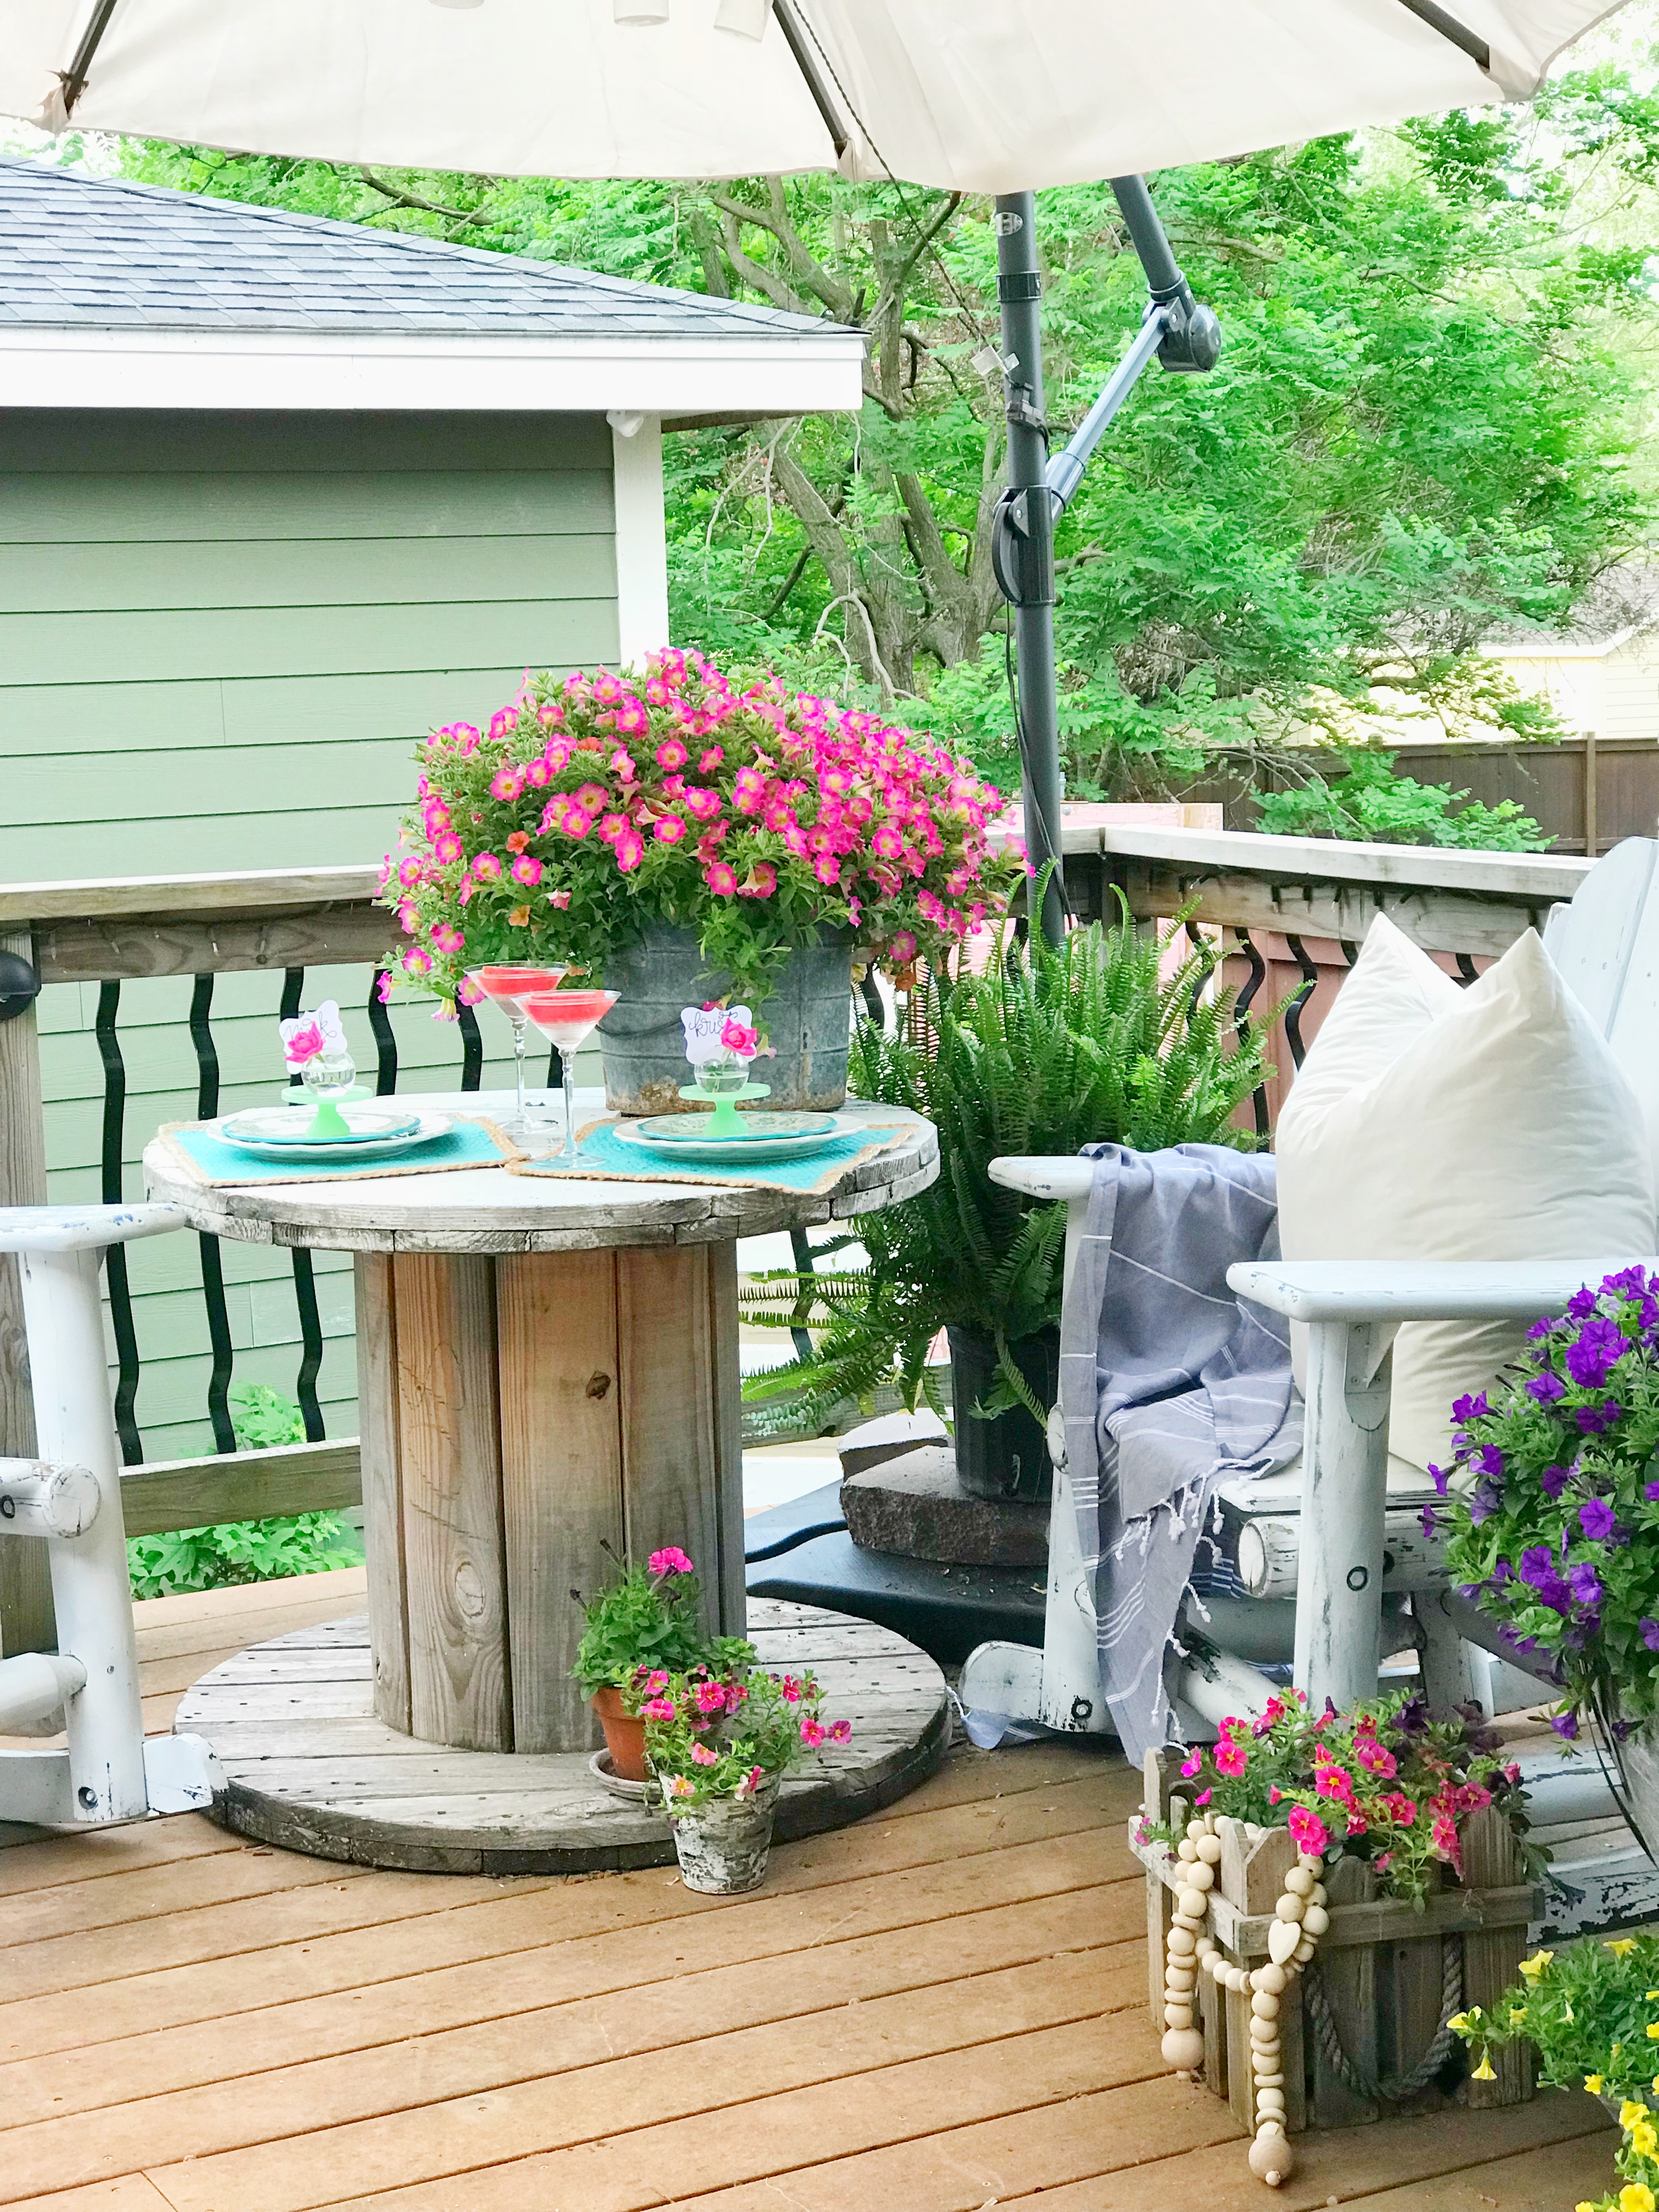 A back deck of a house filled with pots of flowers.